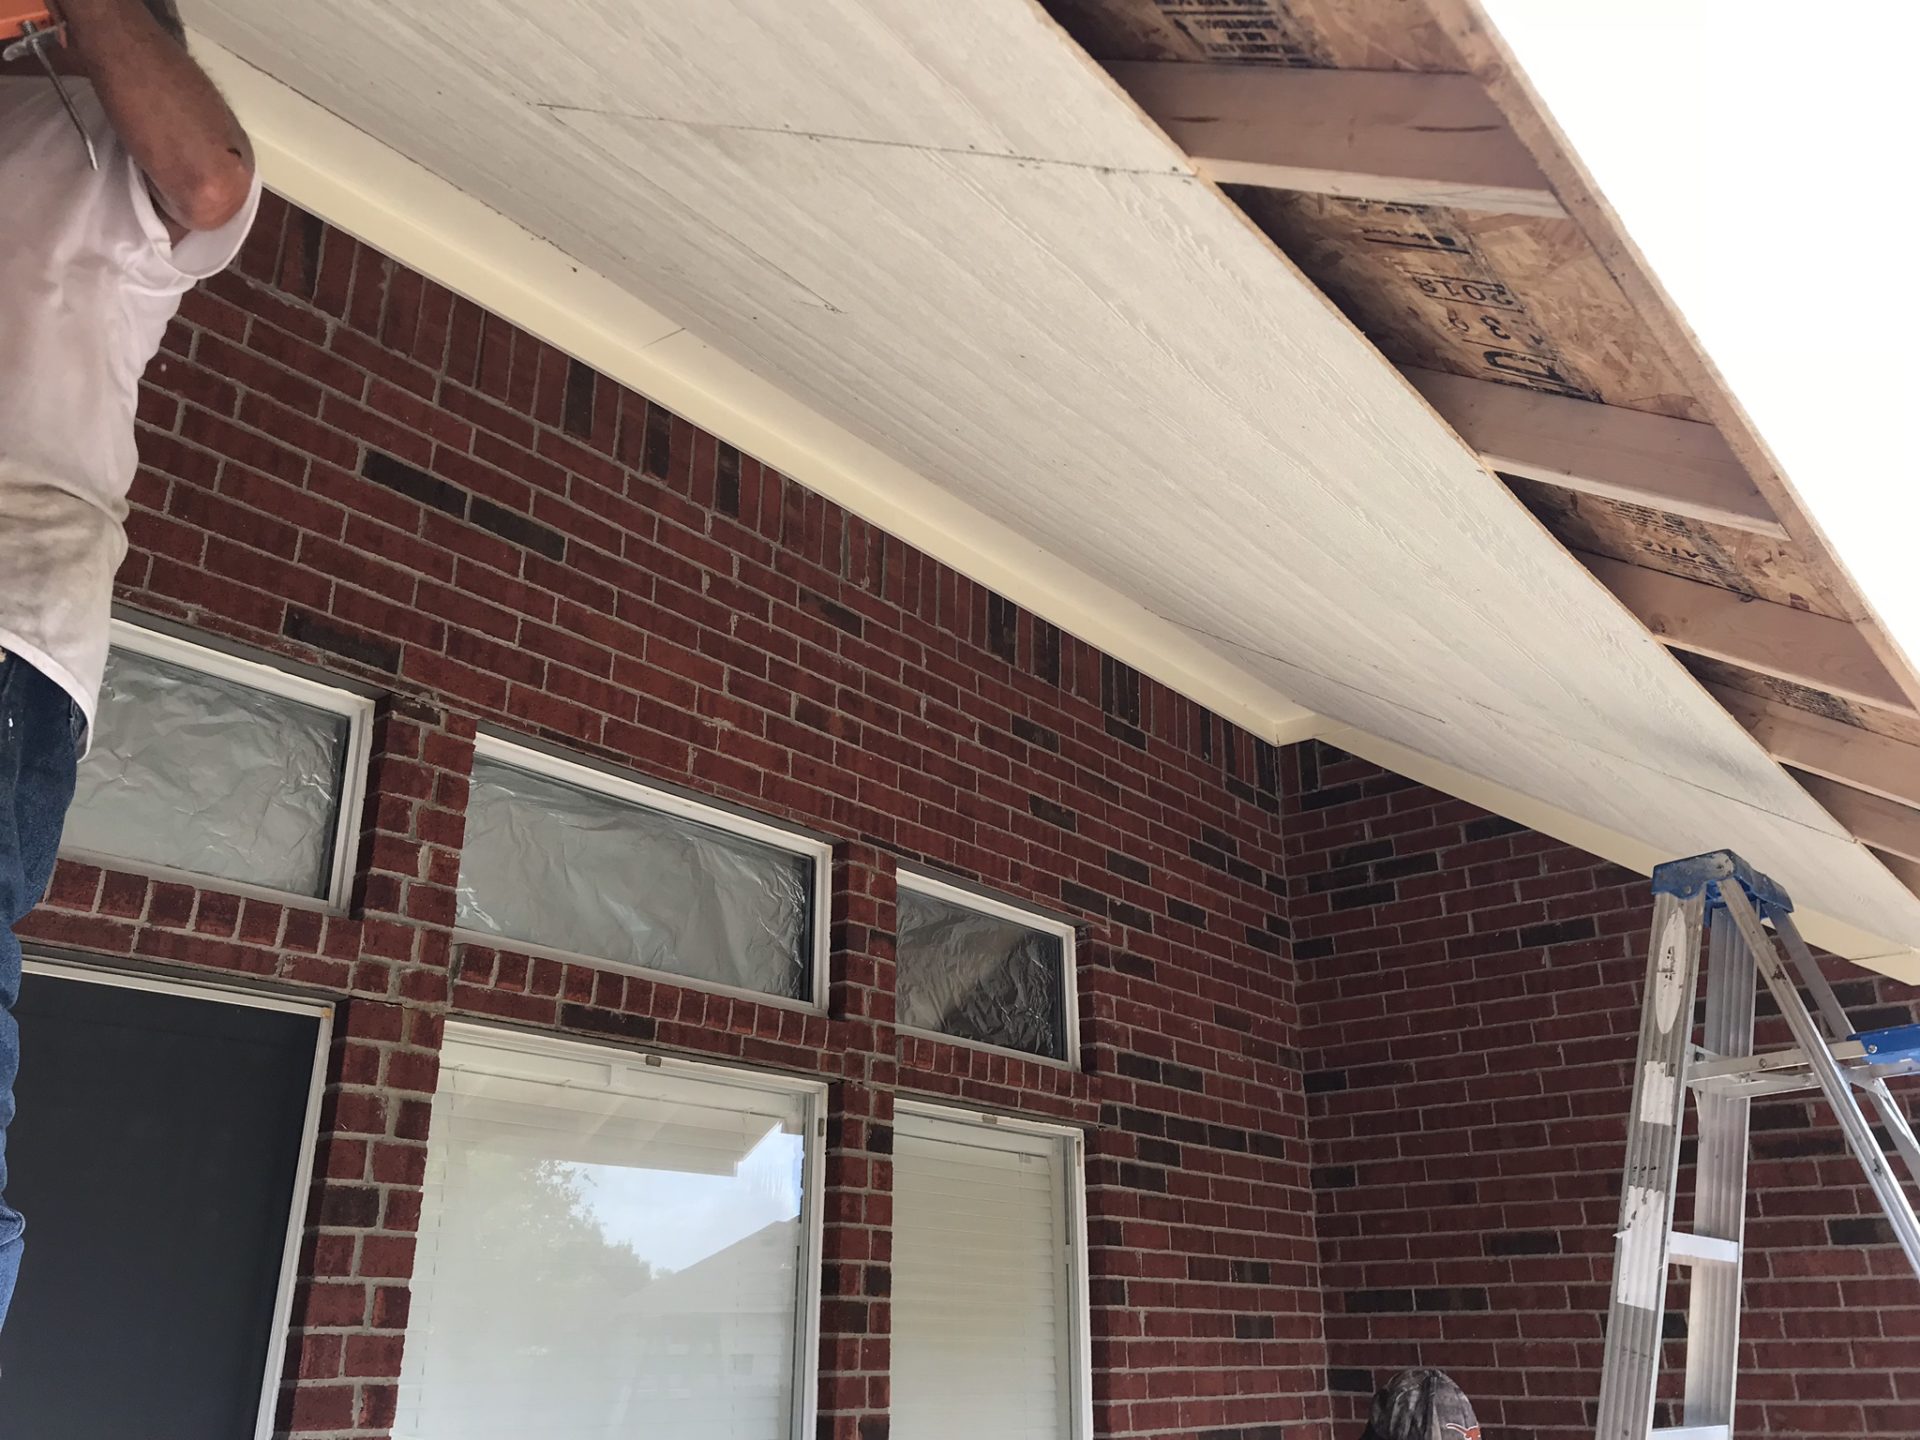 Underside of slanted patio roof by Jenkins Roofing for a homeowner in the Dallas Fort Worth metroplex.